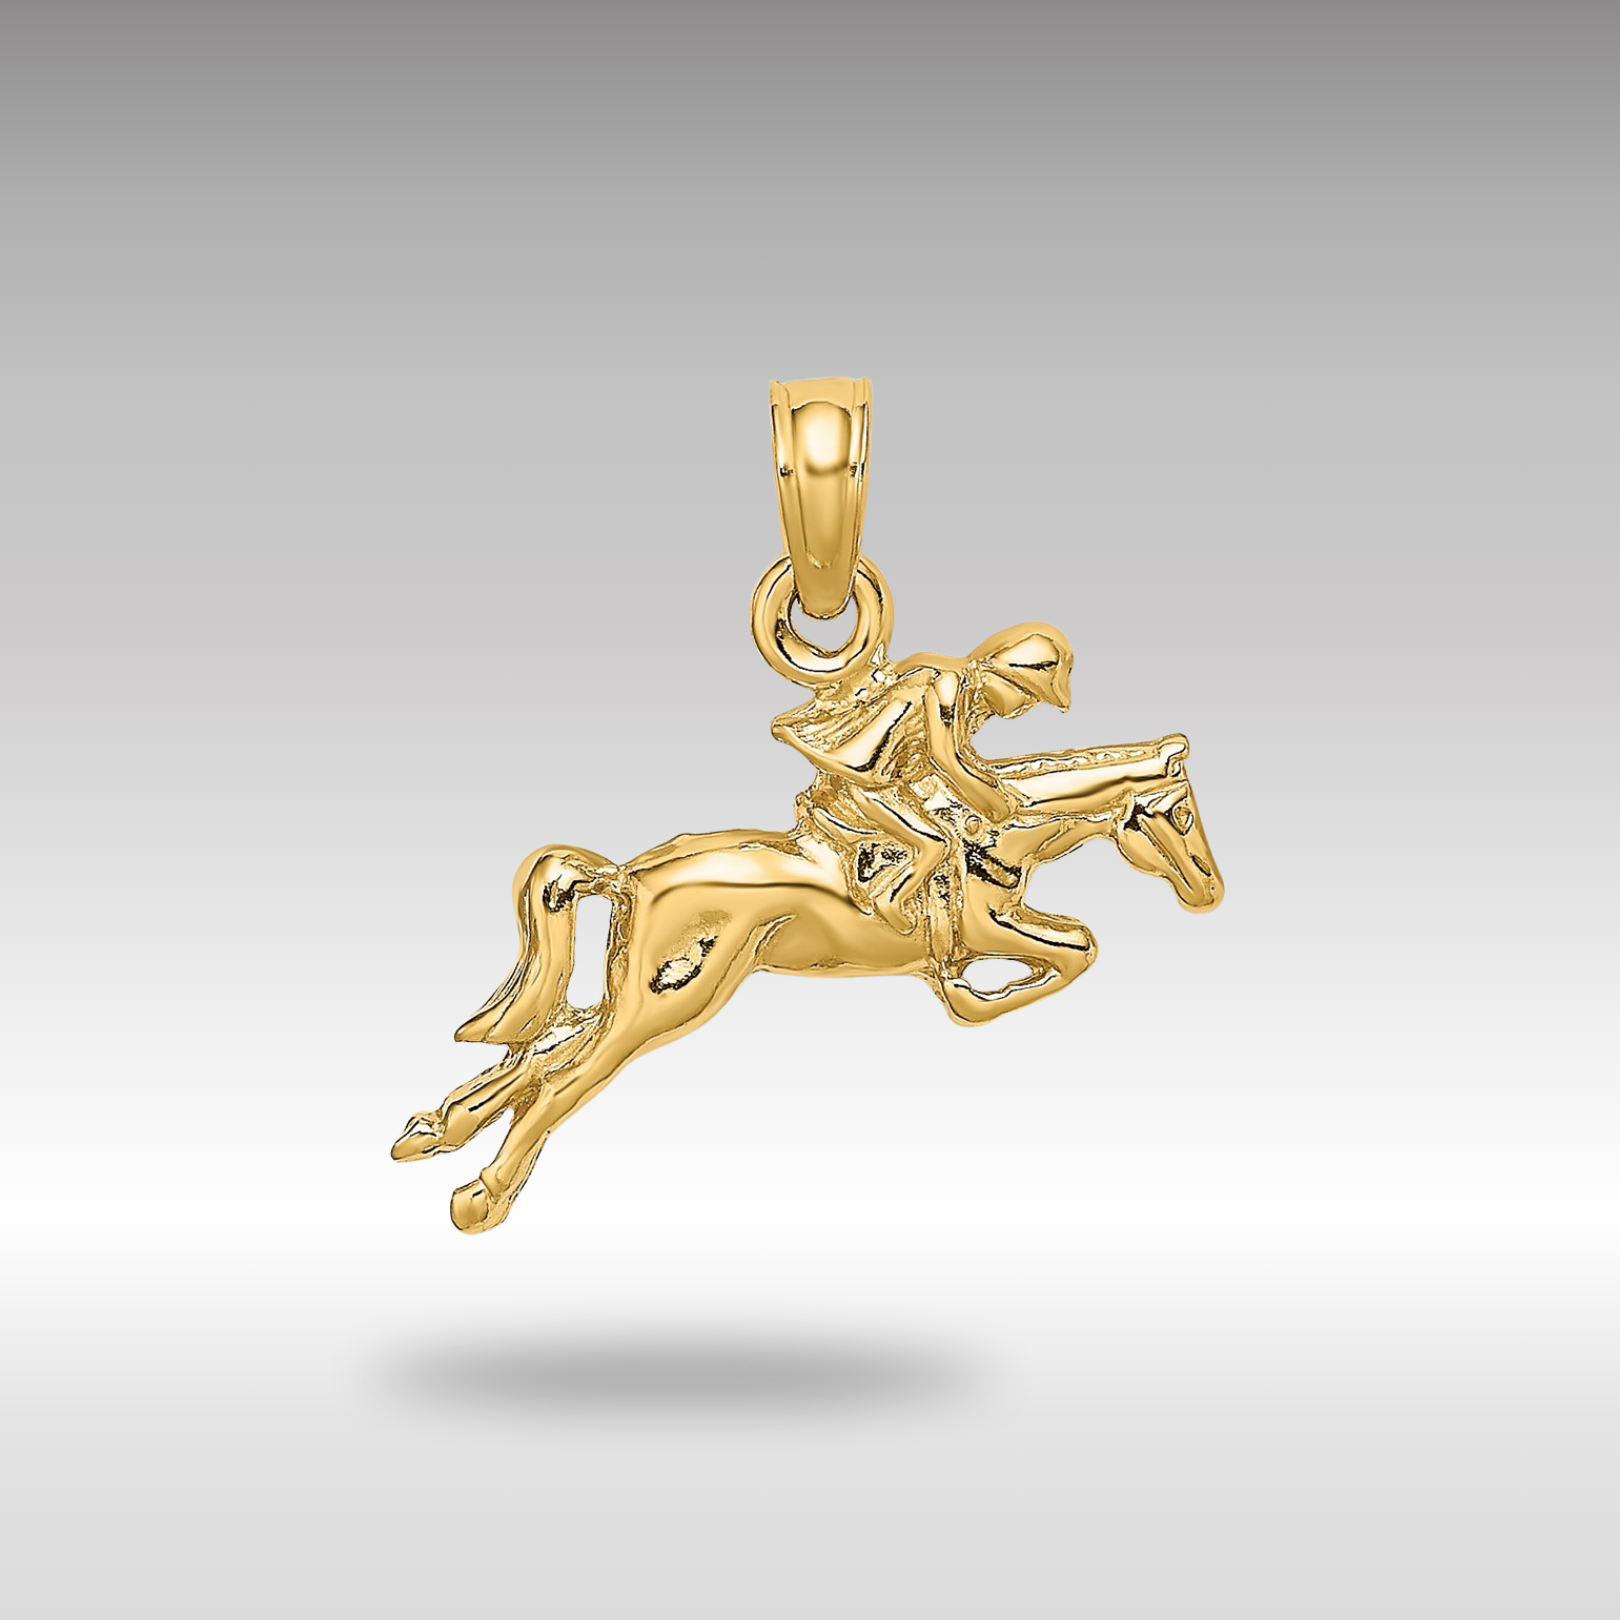 Gold Jockey on Jumping Horse Necklace Pendant - Charlie & Co. Jewelry